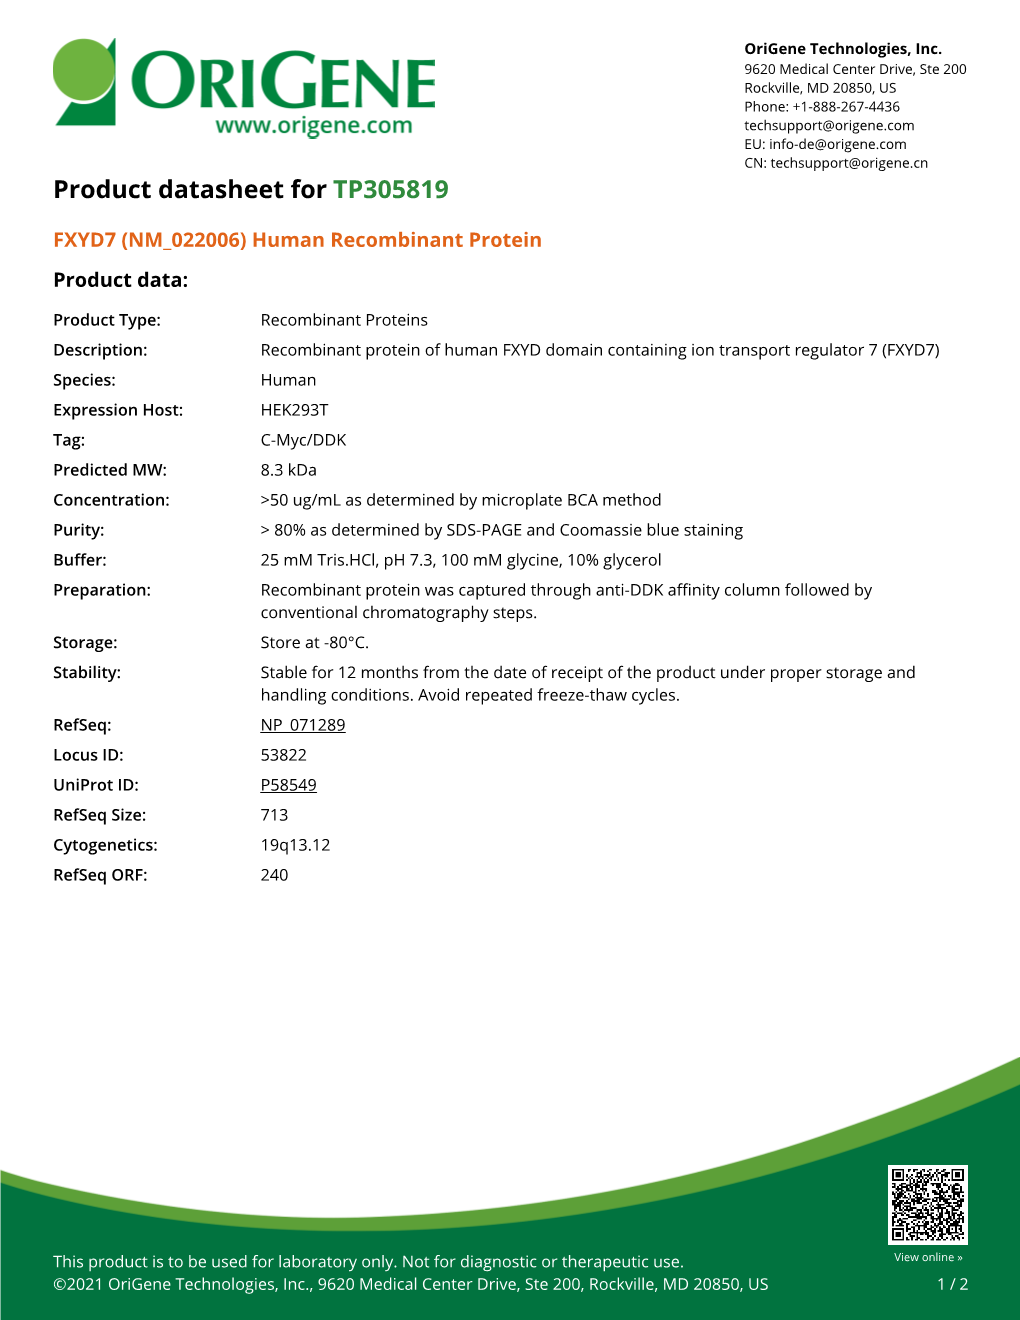 Human Recombinant Protein – TP305819